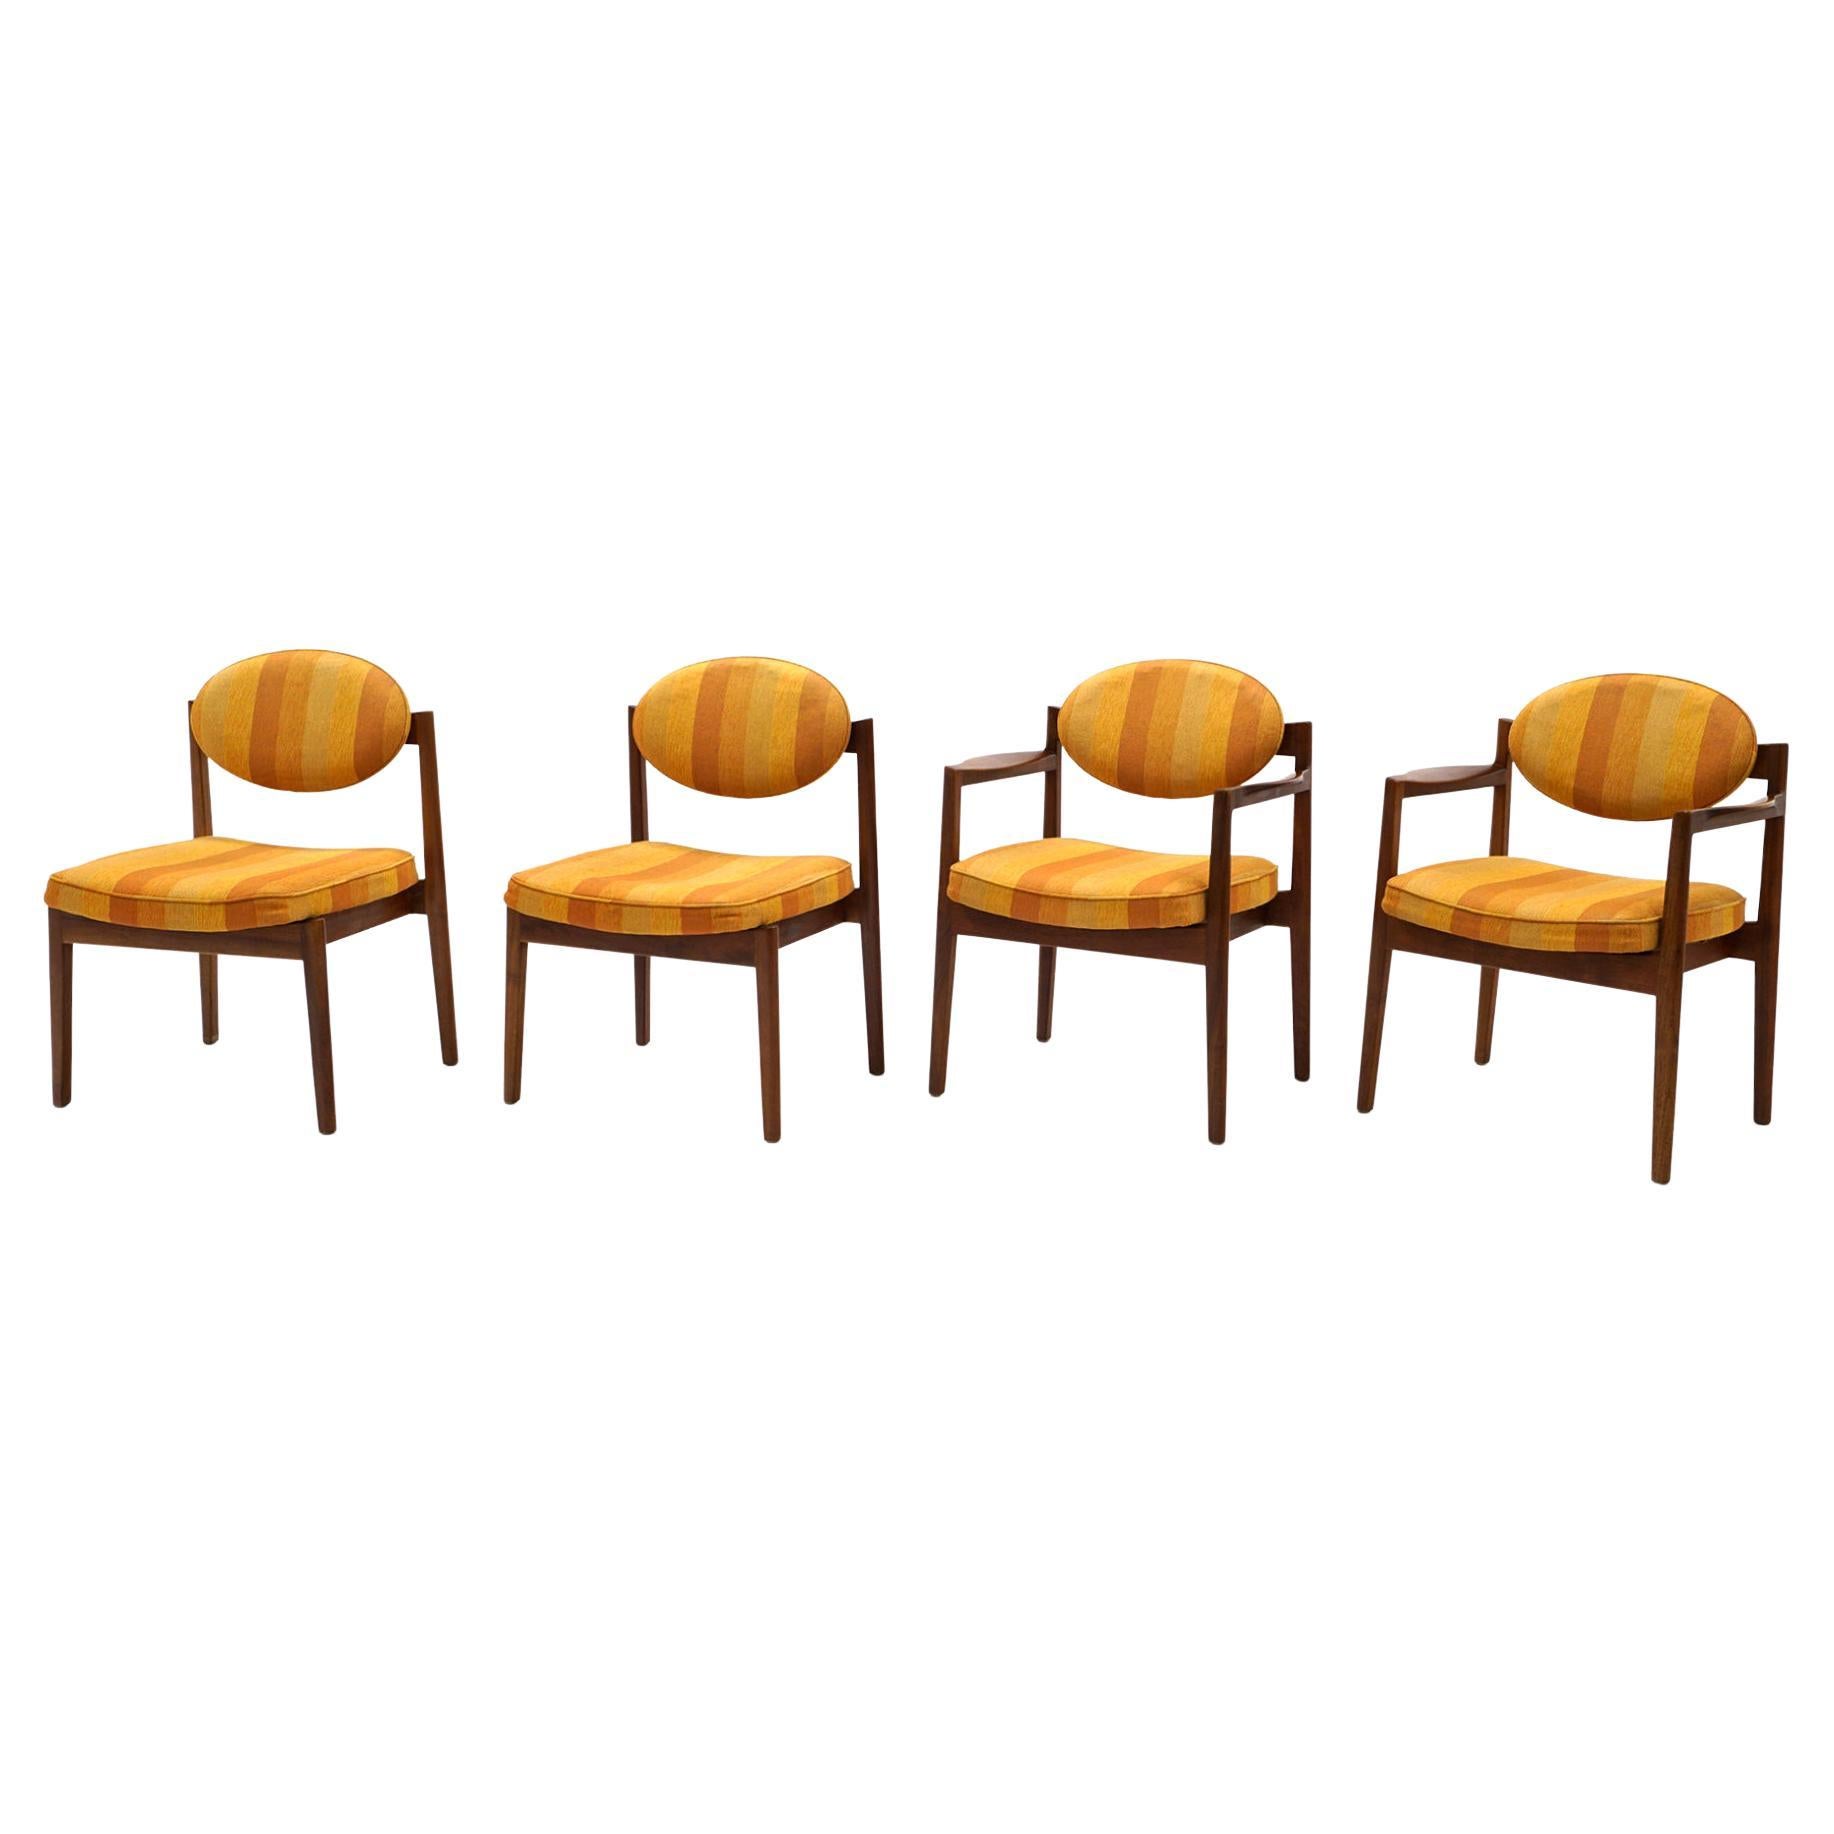 Jens Risom Dining Chairs, Set of Four, Two Arm and Two Side Chairs, Walnut